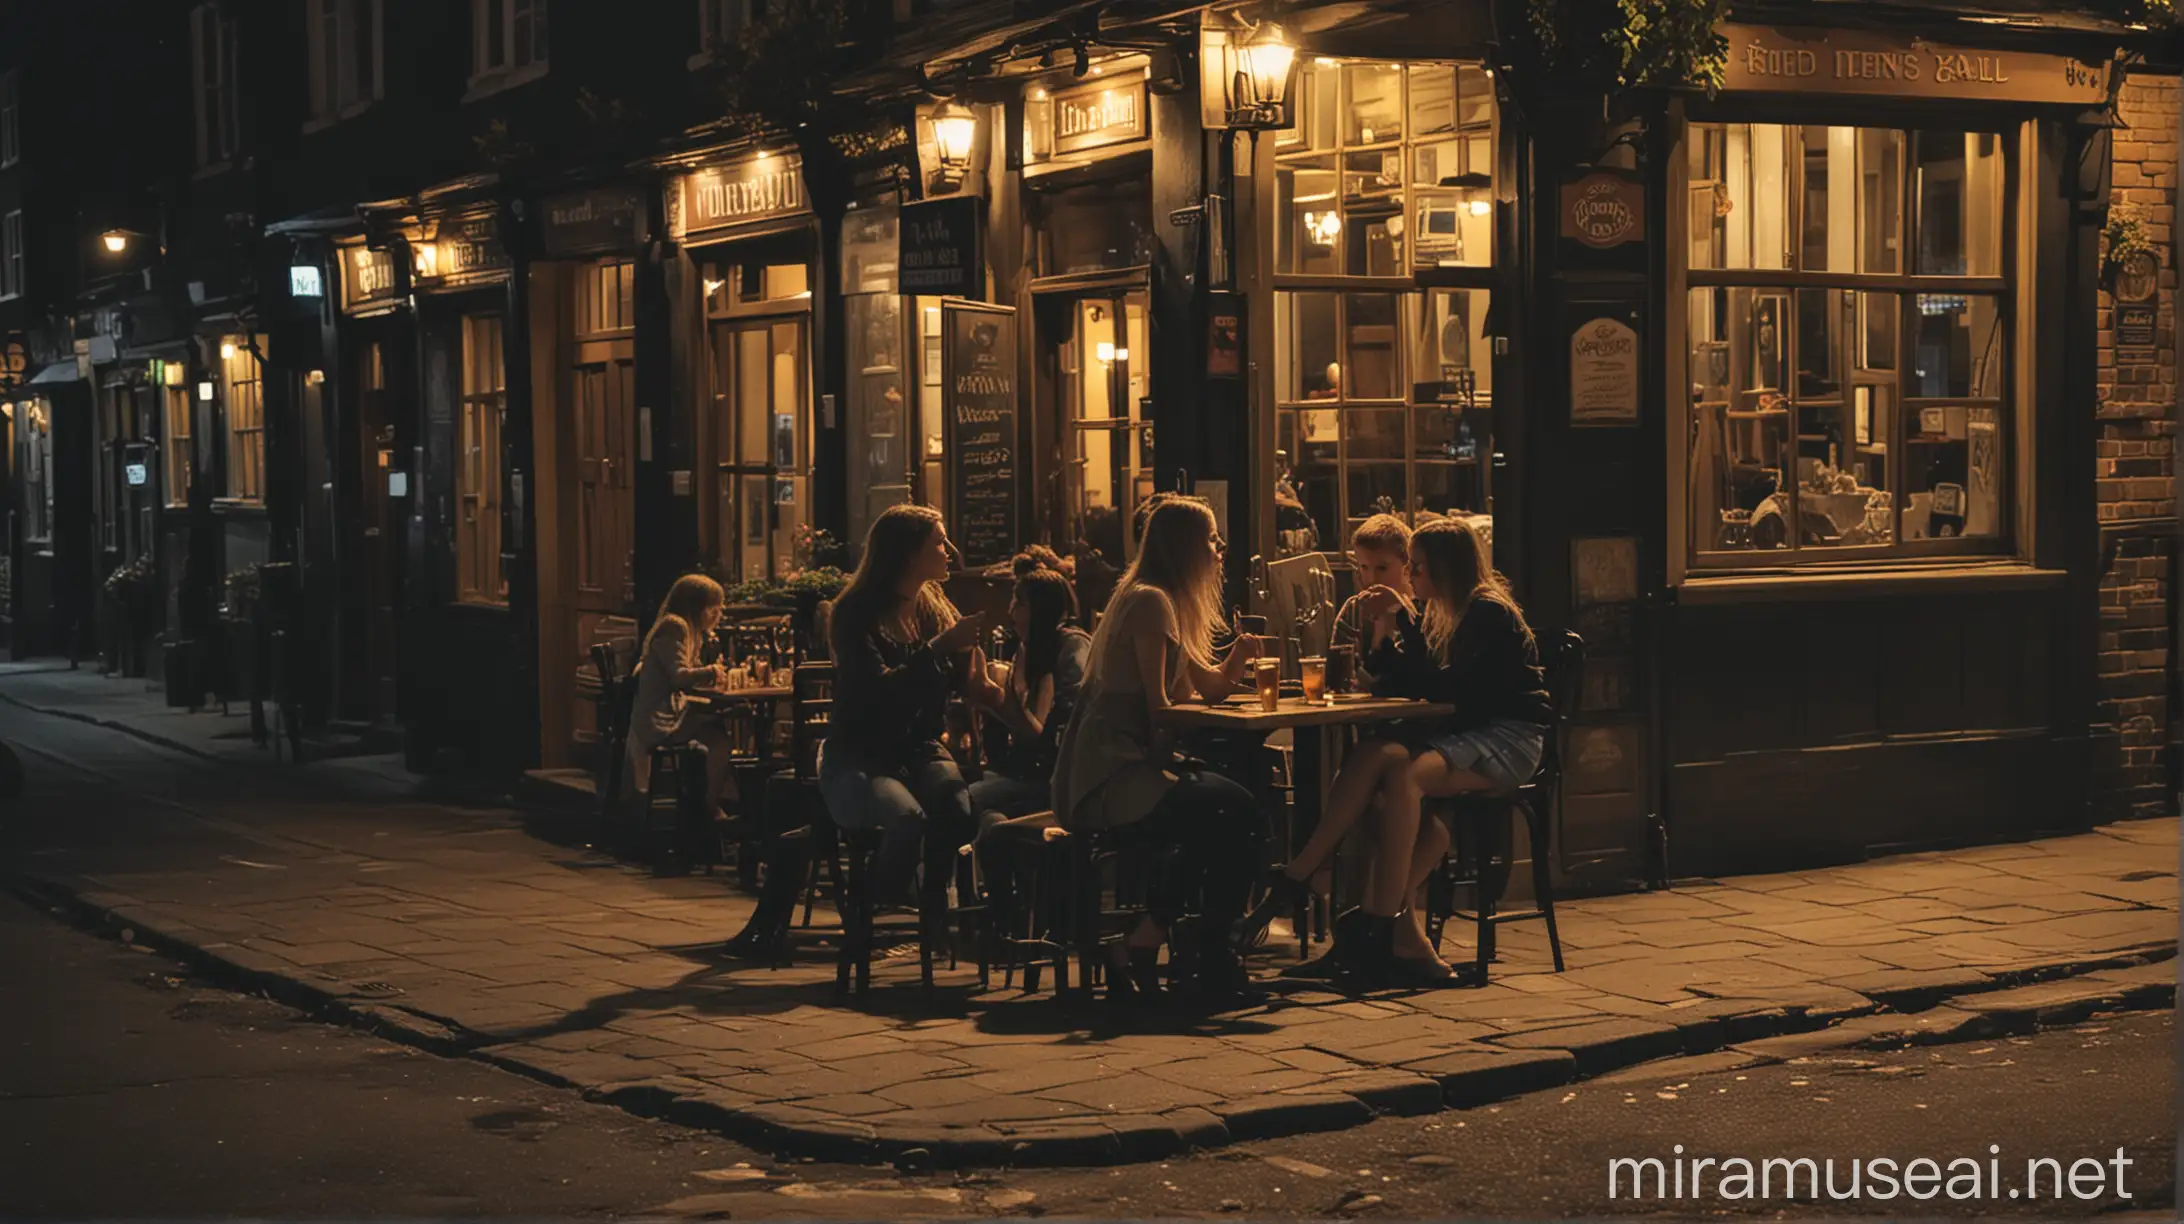 make two girls and a boy
 sitting outside a pub at night drinking
